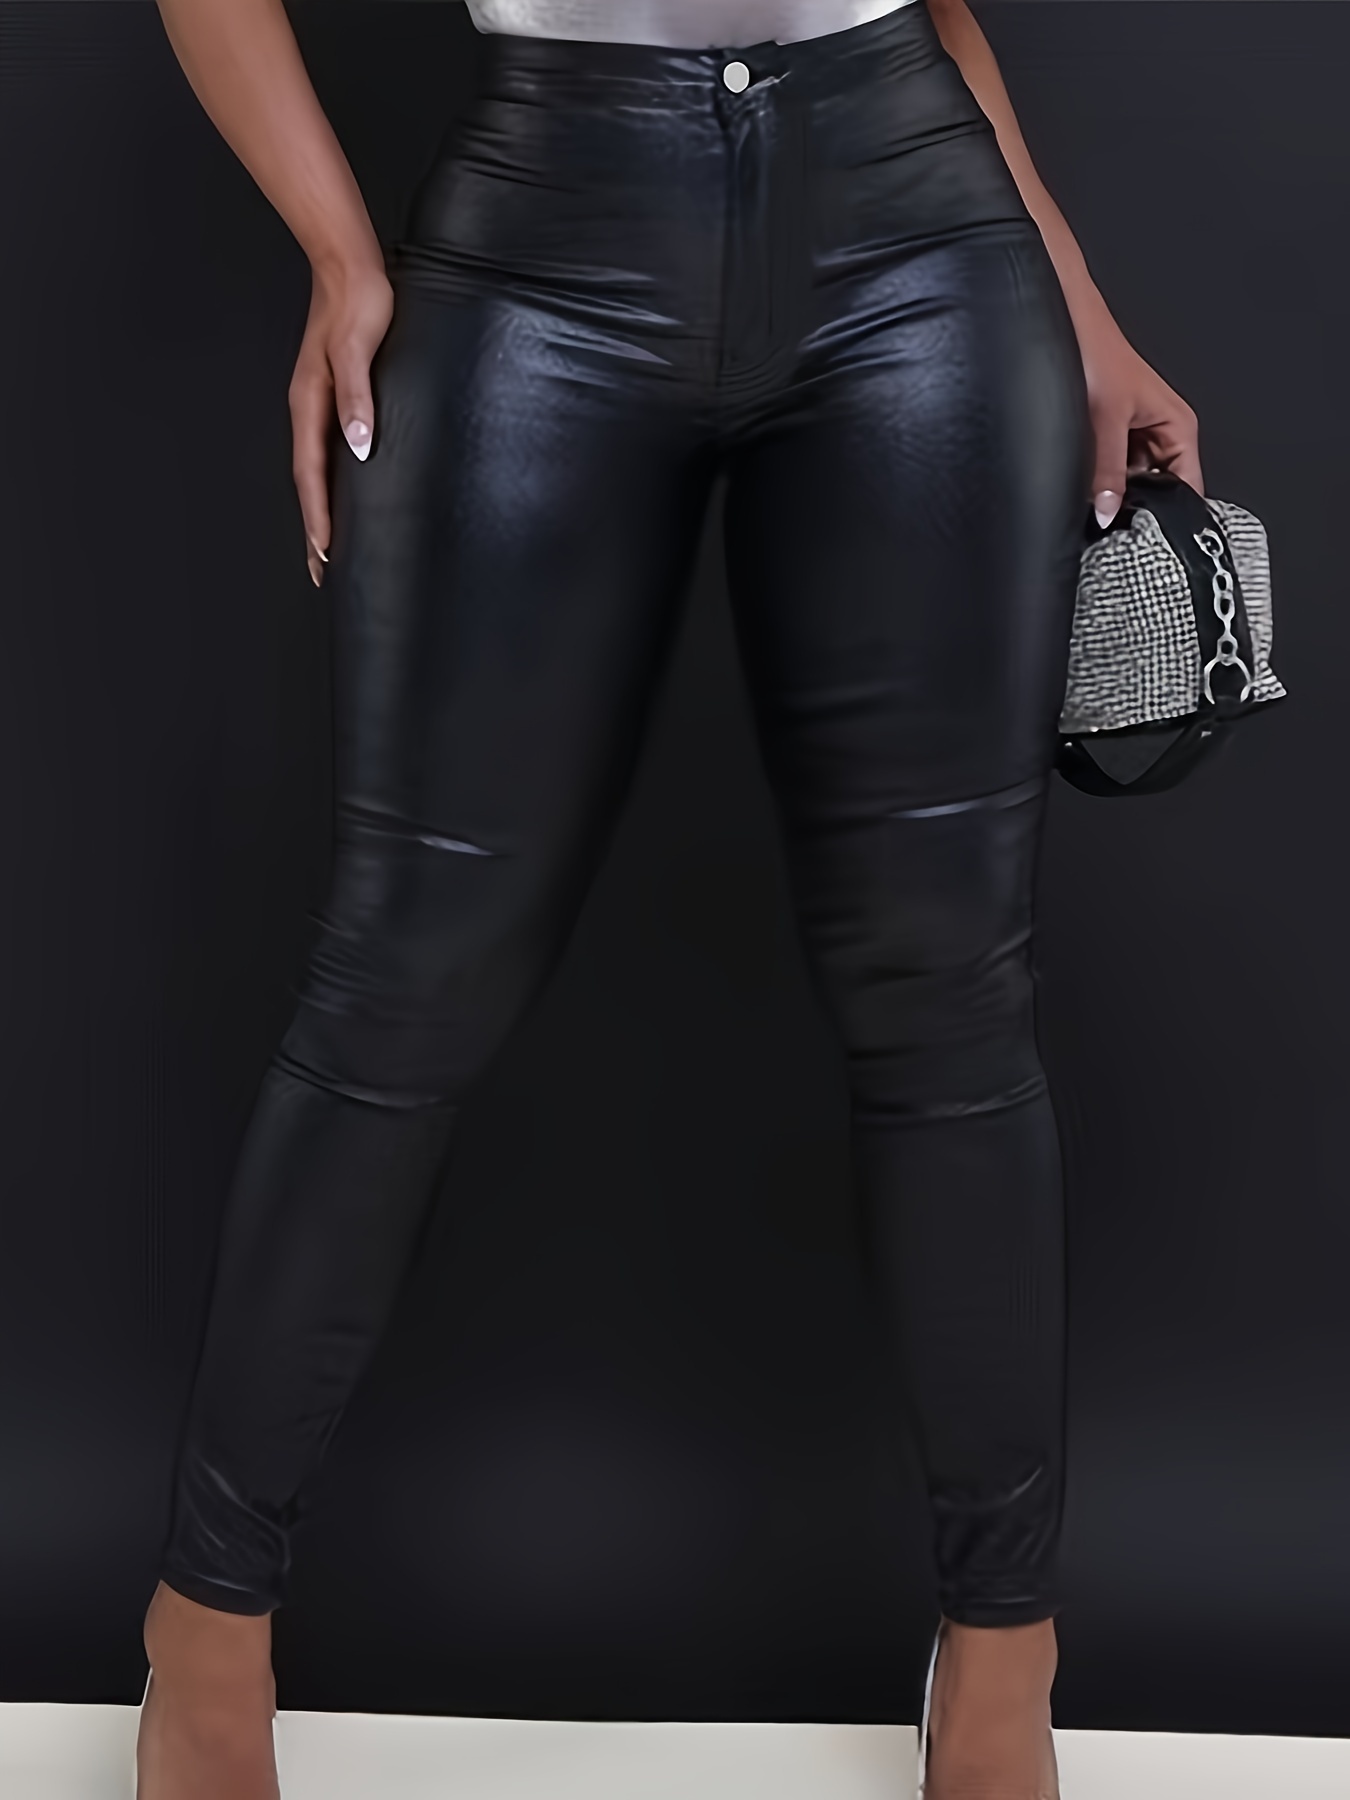 Black Leather Look Skinny Jeans, High Stretch Slim Fit Chic Tight Jeans,  Women's Denim Jeans & Clothing